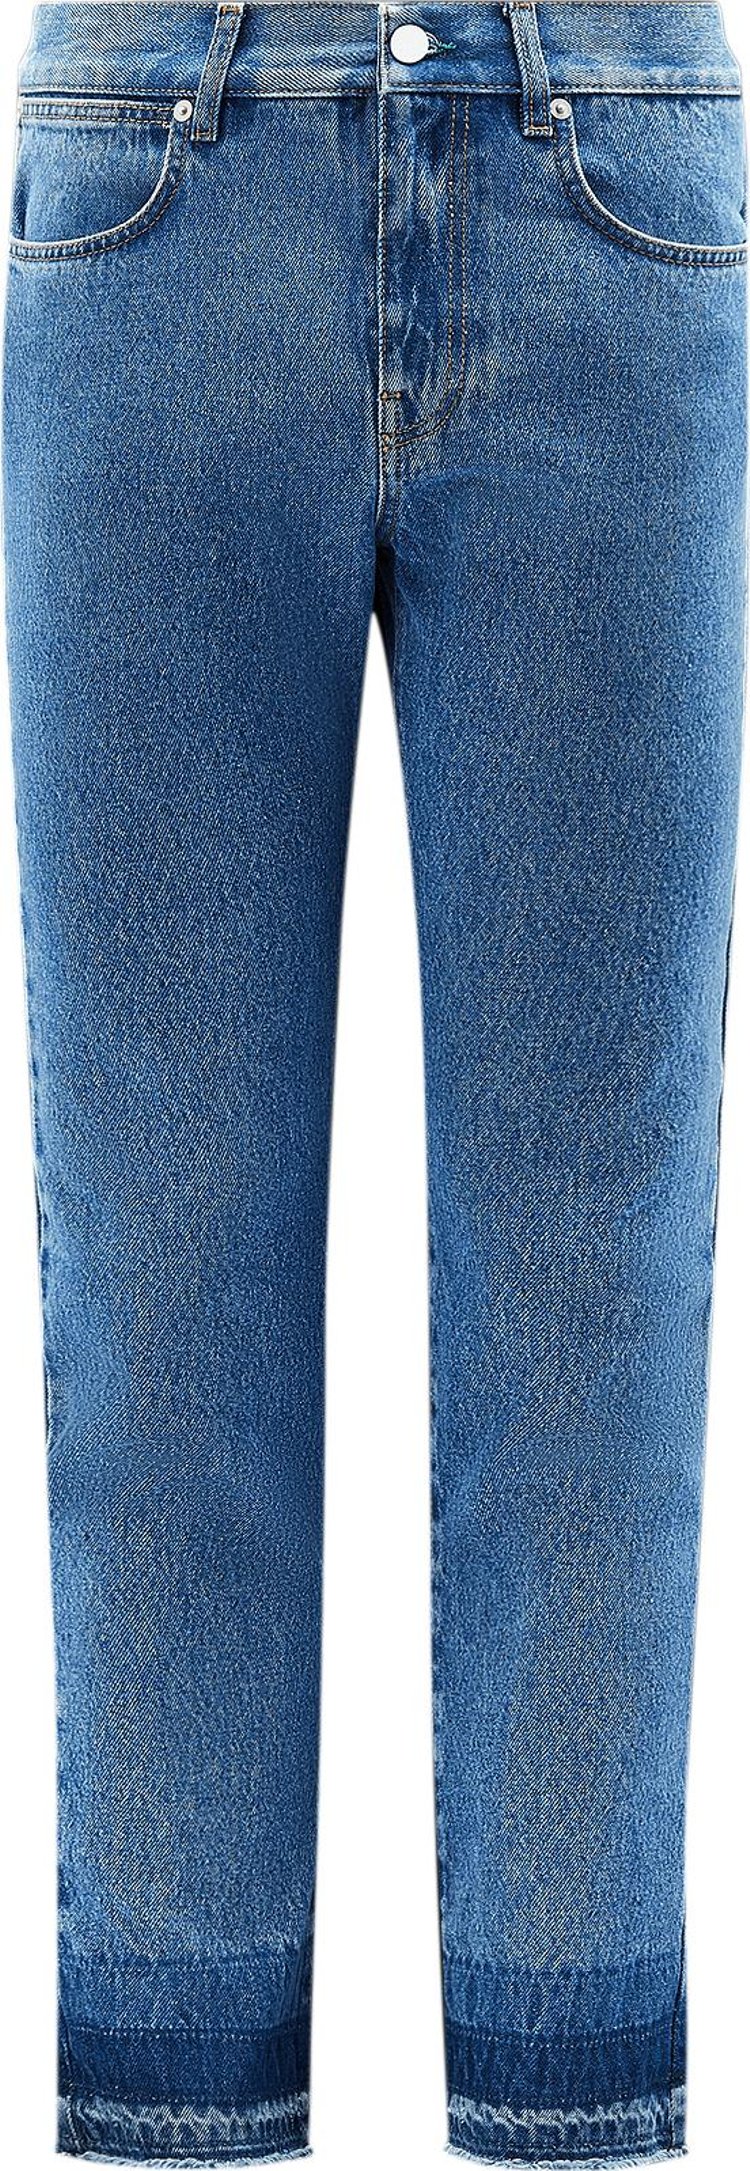 MCQ Washed Jeans 'Washed Blue'